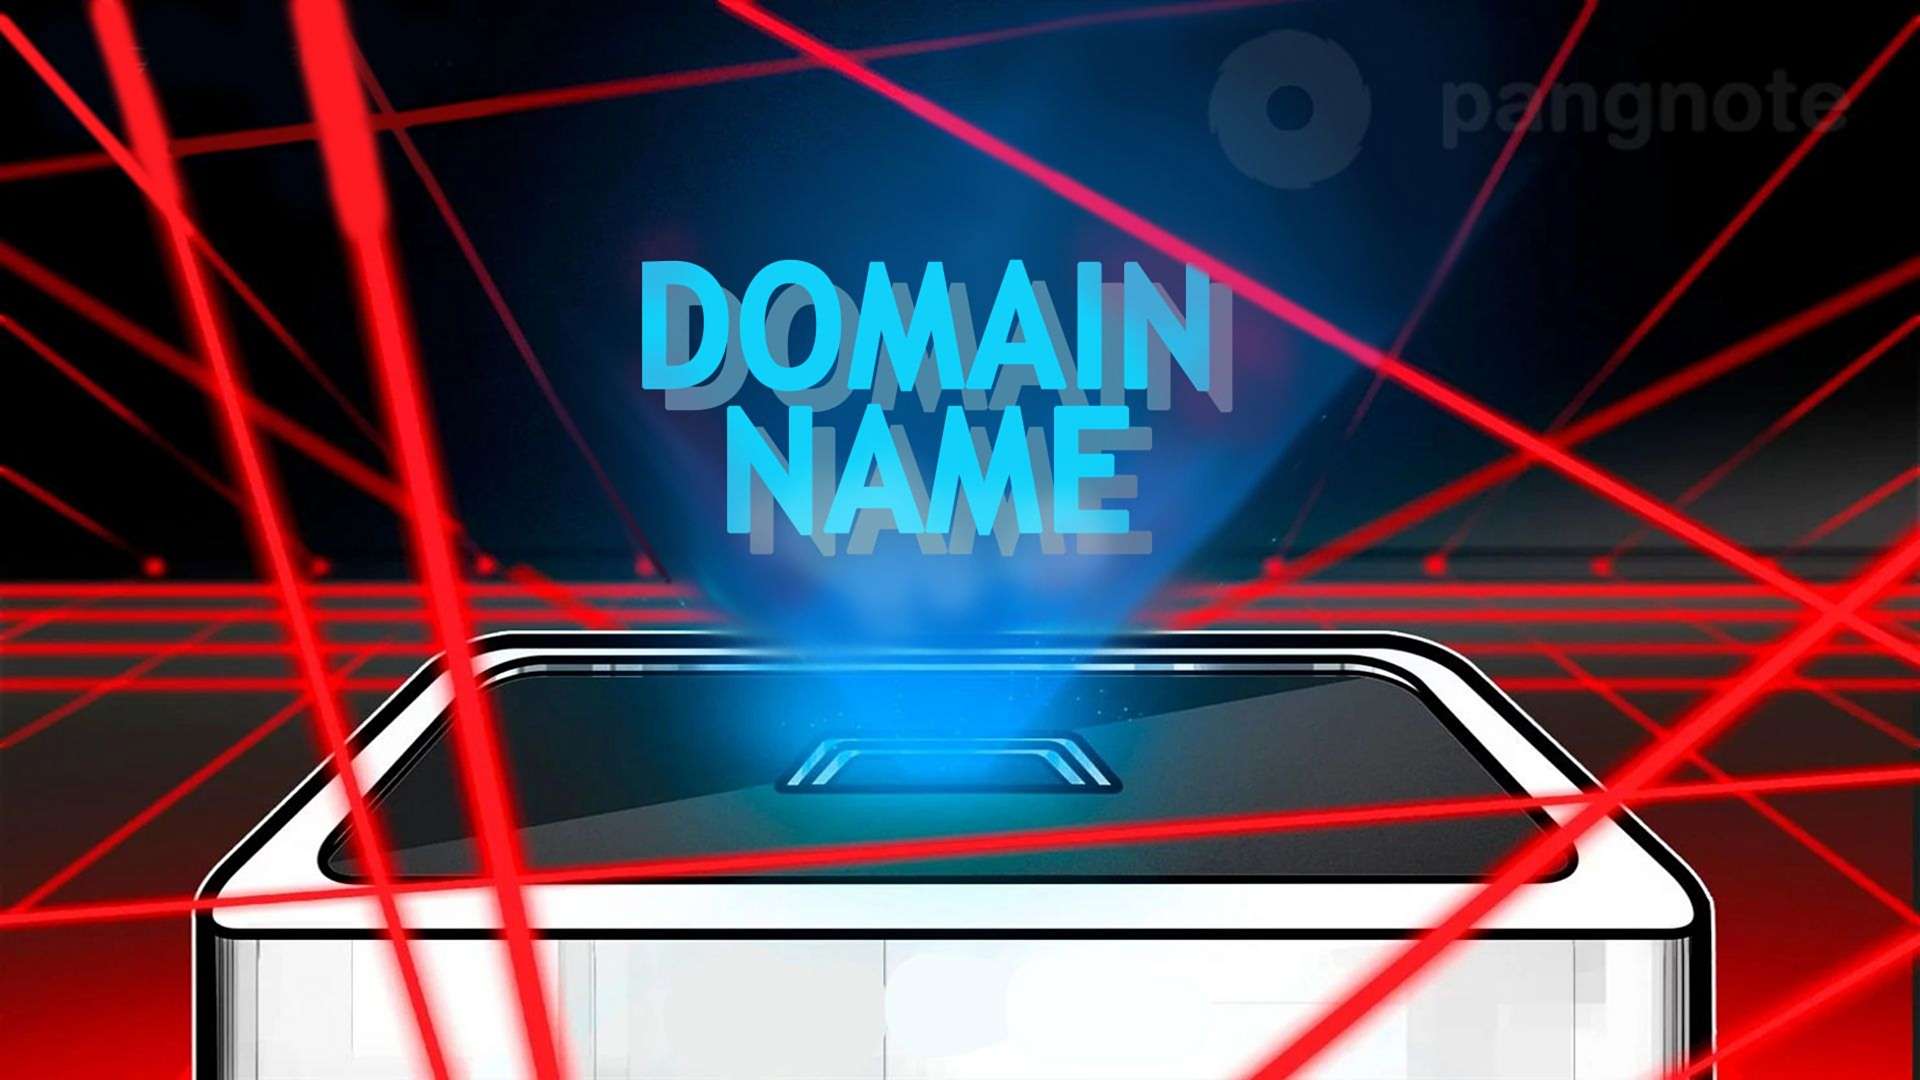 How to protect your domain name and web address?